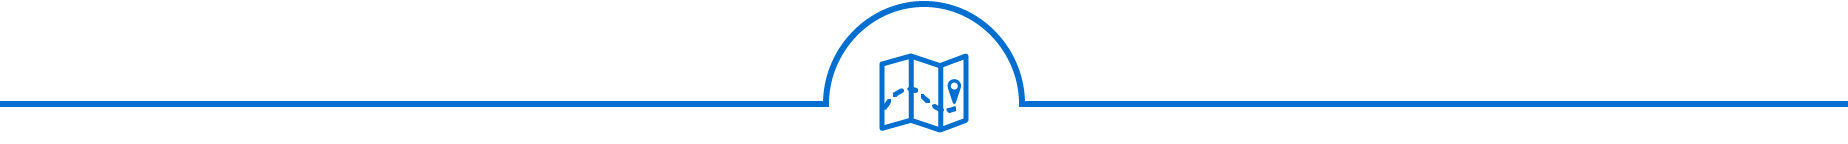 Map icon representing planning.